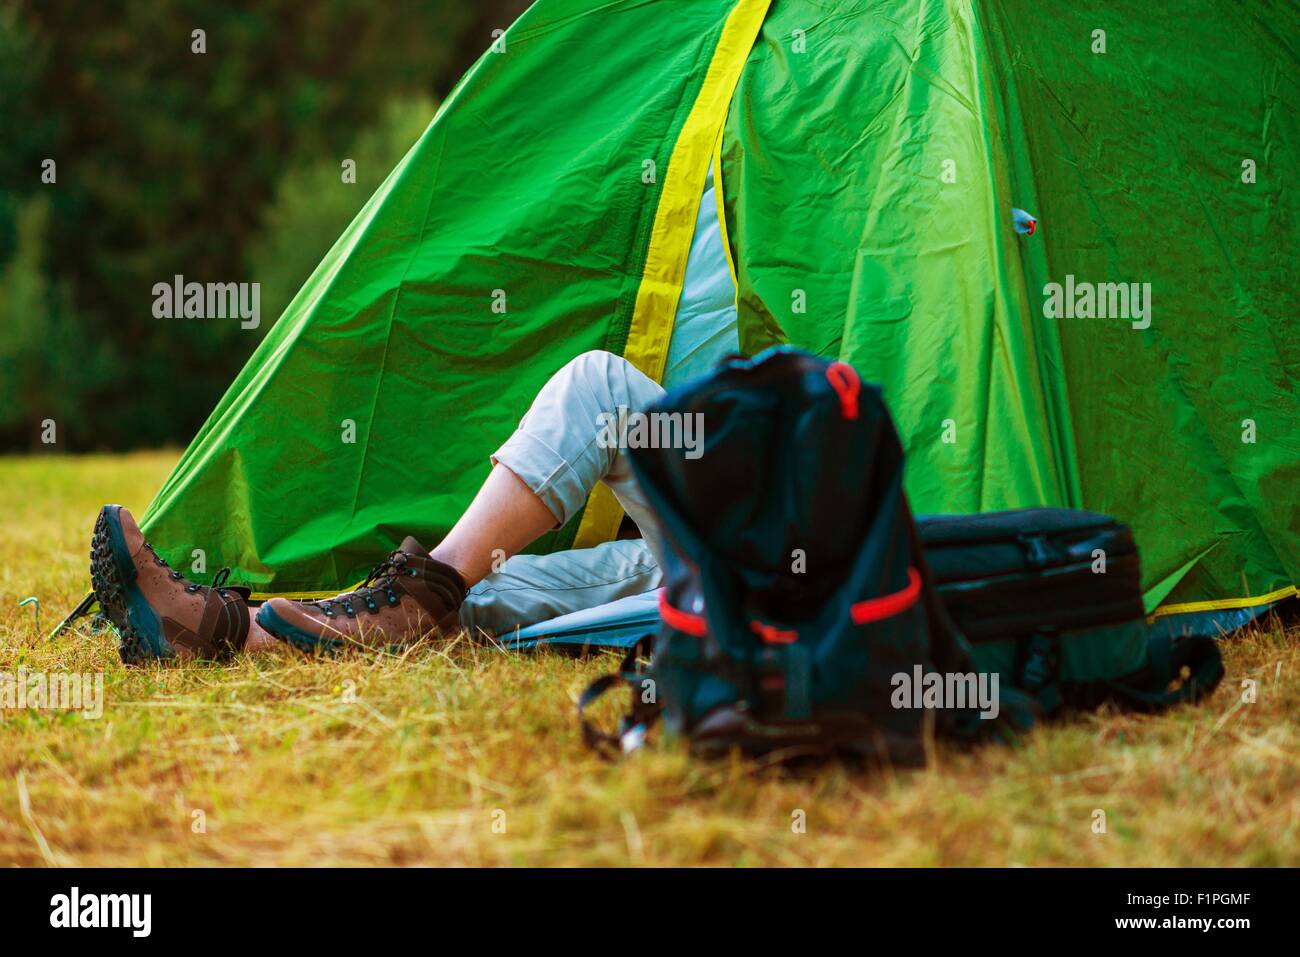 Resting Hiker in His Medium Size Tent. Wild Campsite. Hiking and Tent Camping Theme. Stock Photo